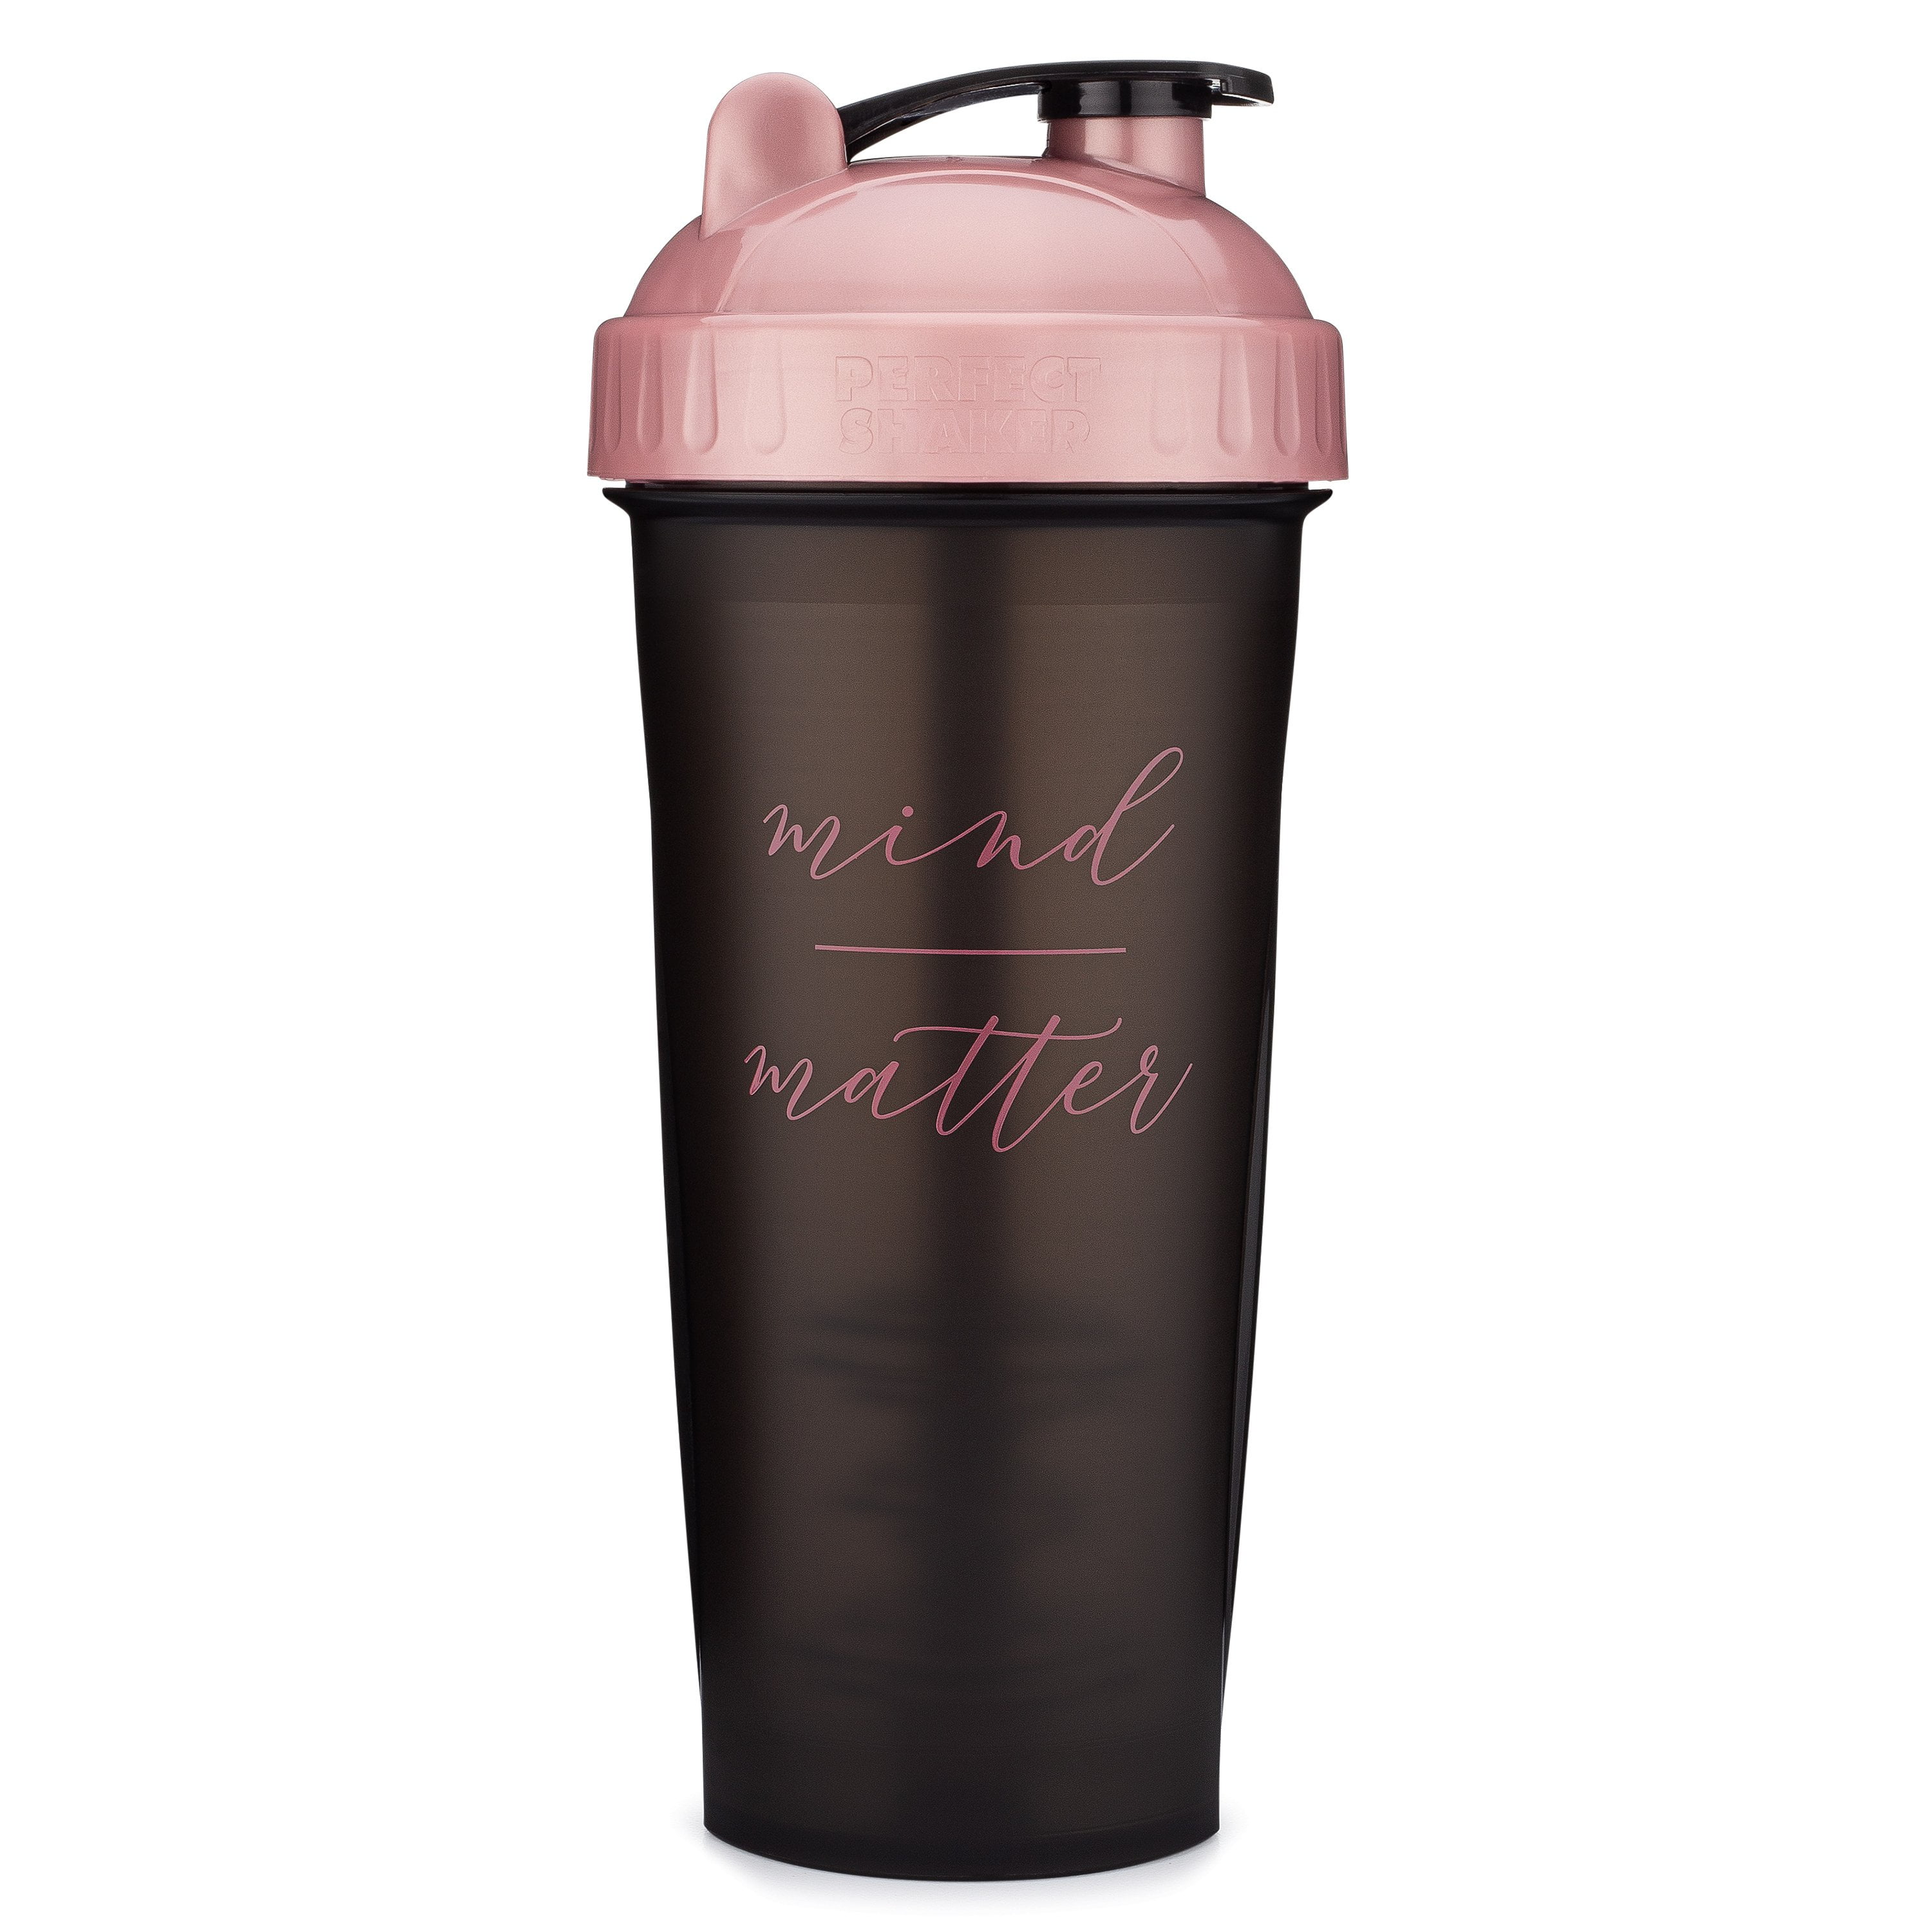 When it's time to pump iron, I need my favorite gym bottle #shaker #pr